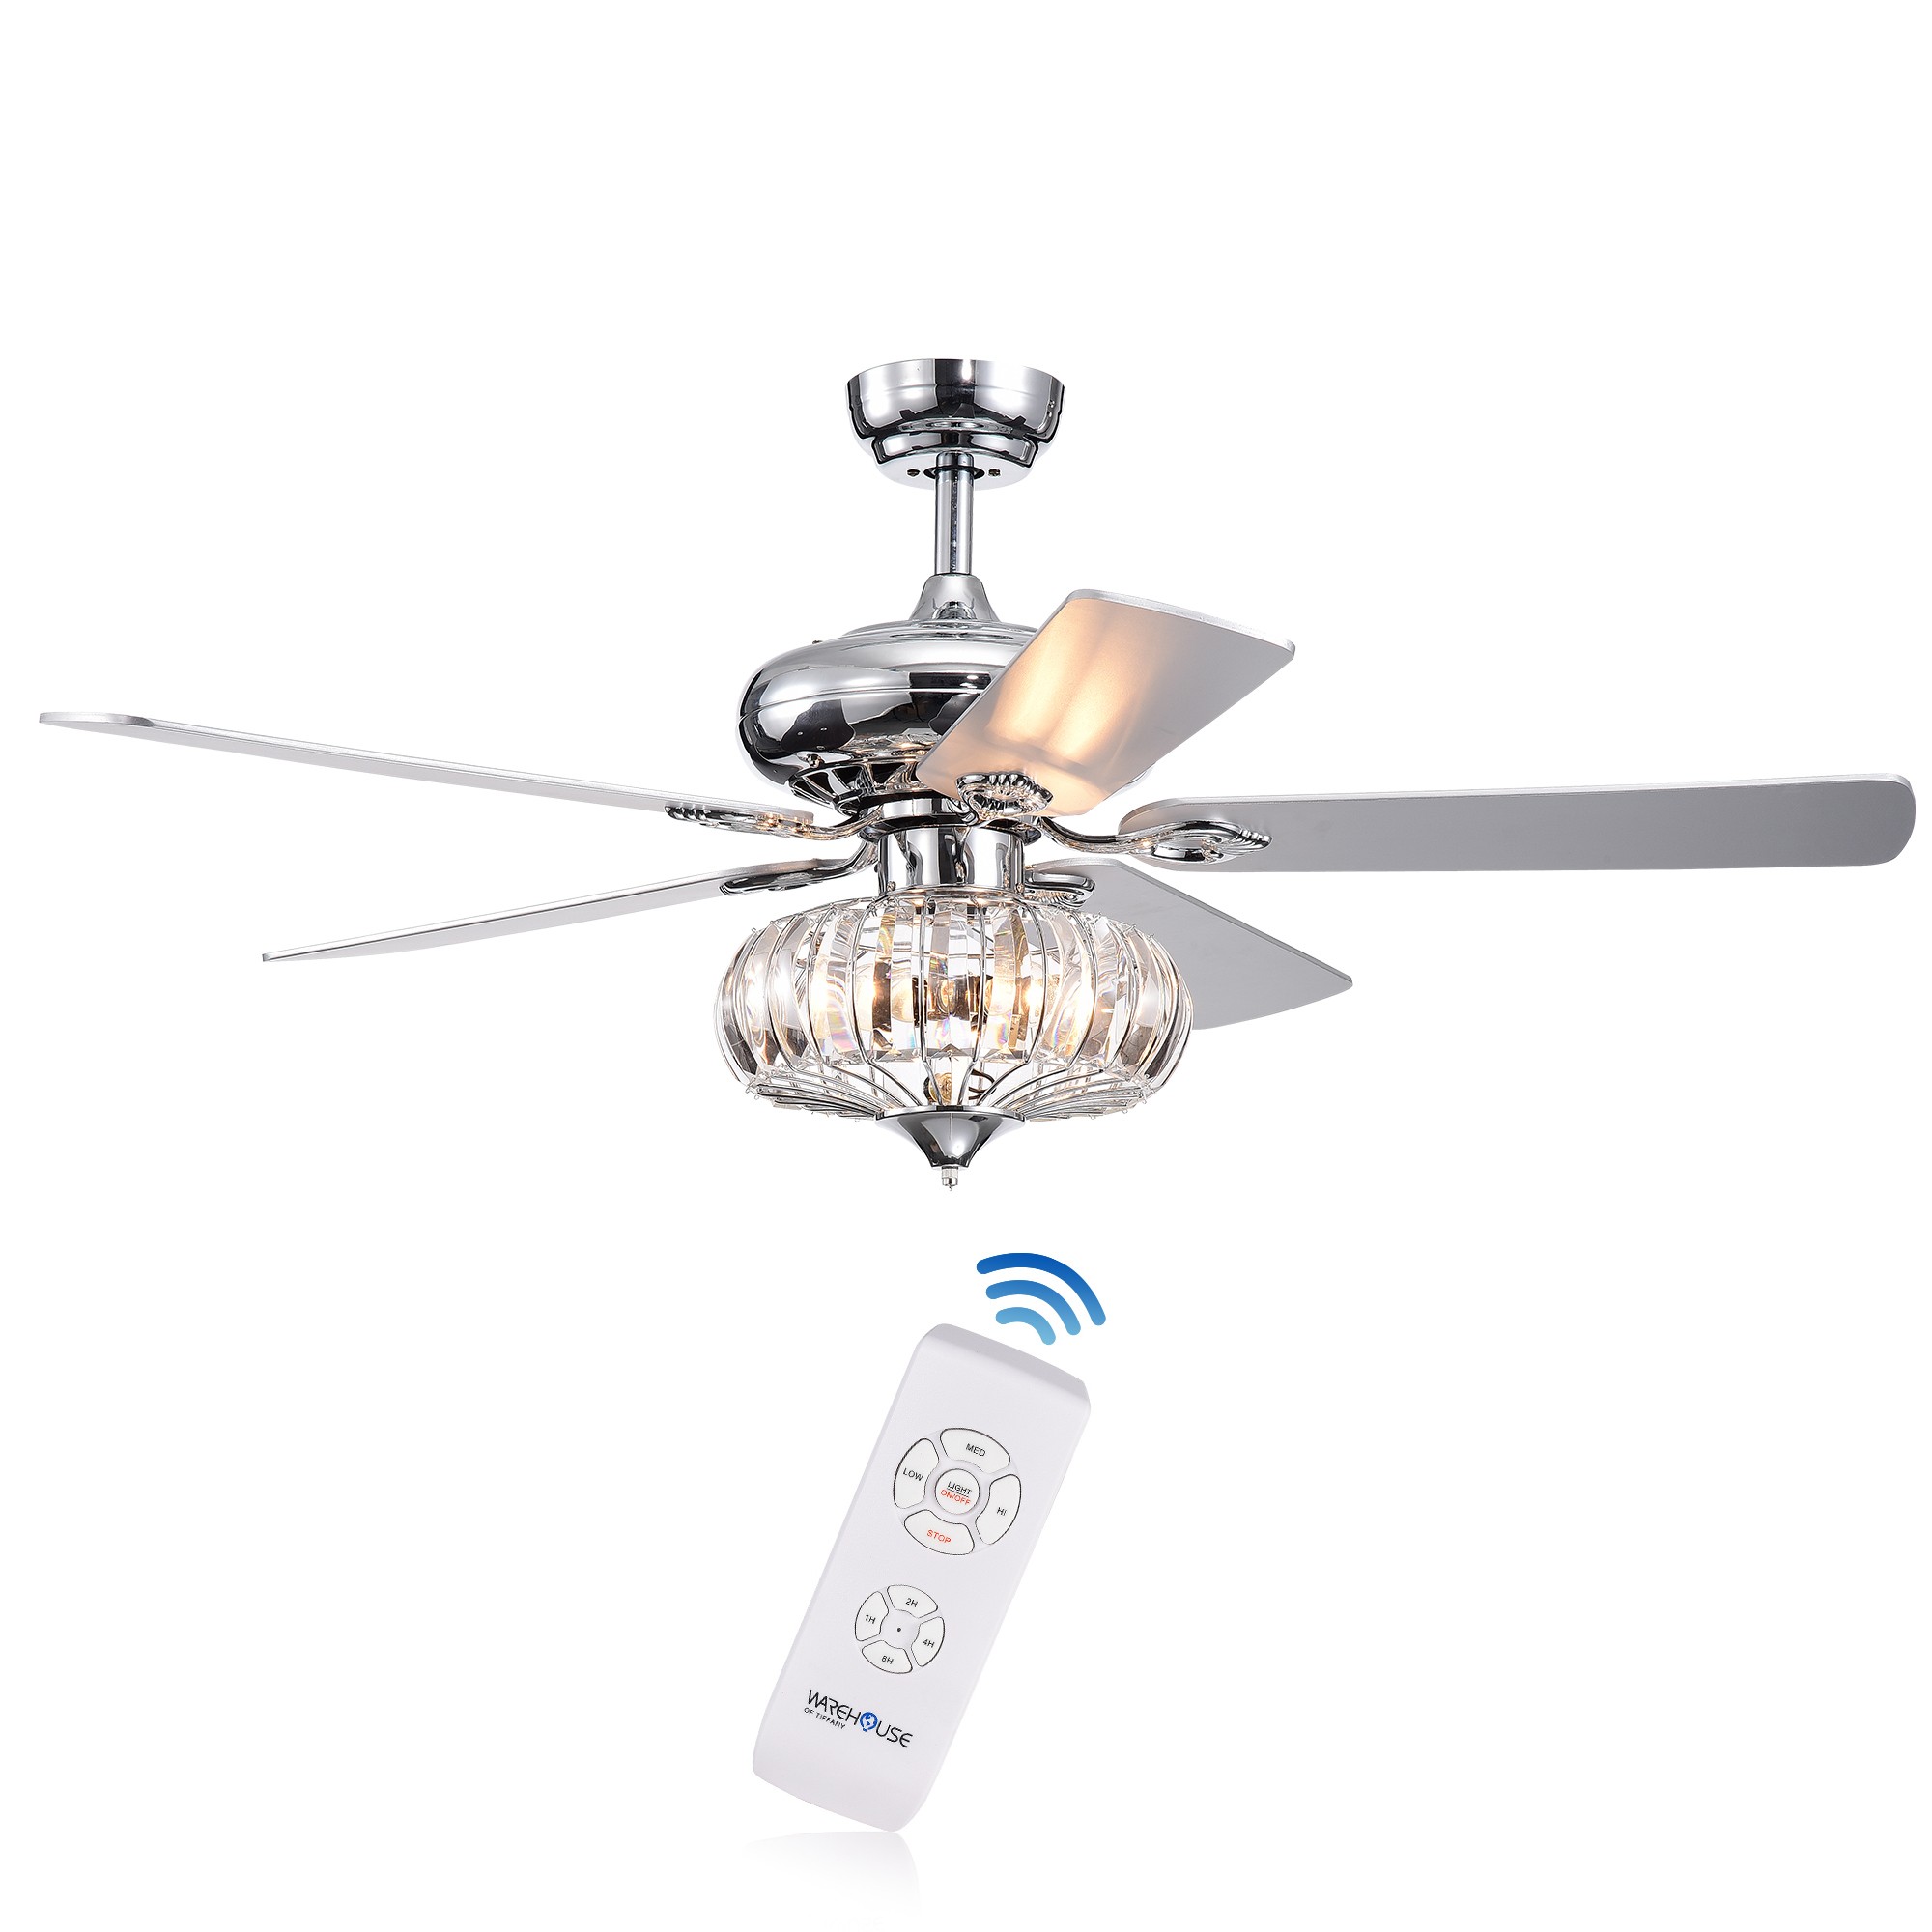 Kyana DeBase 52-Inch 5-Blade Chrome Lighted Ceiling Fans with Crystal Bowl Shade (Optional Remote Control)